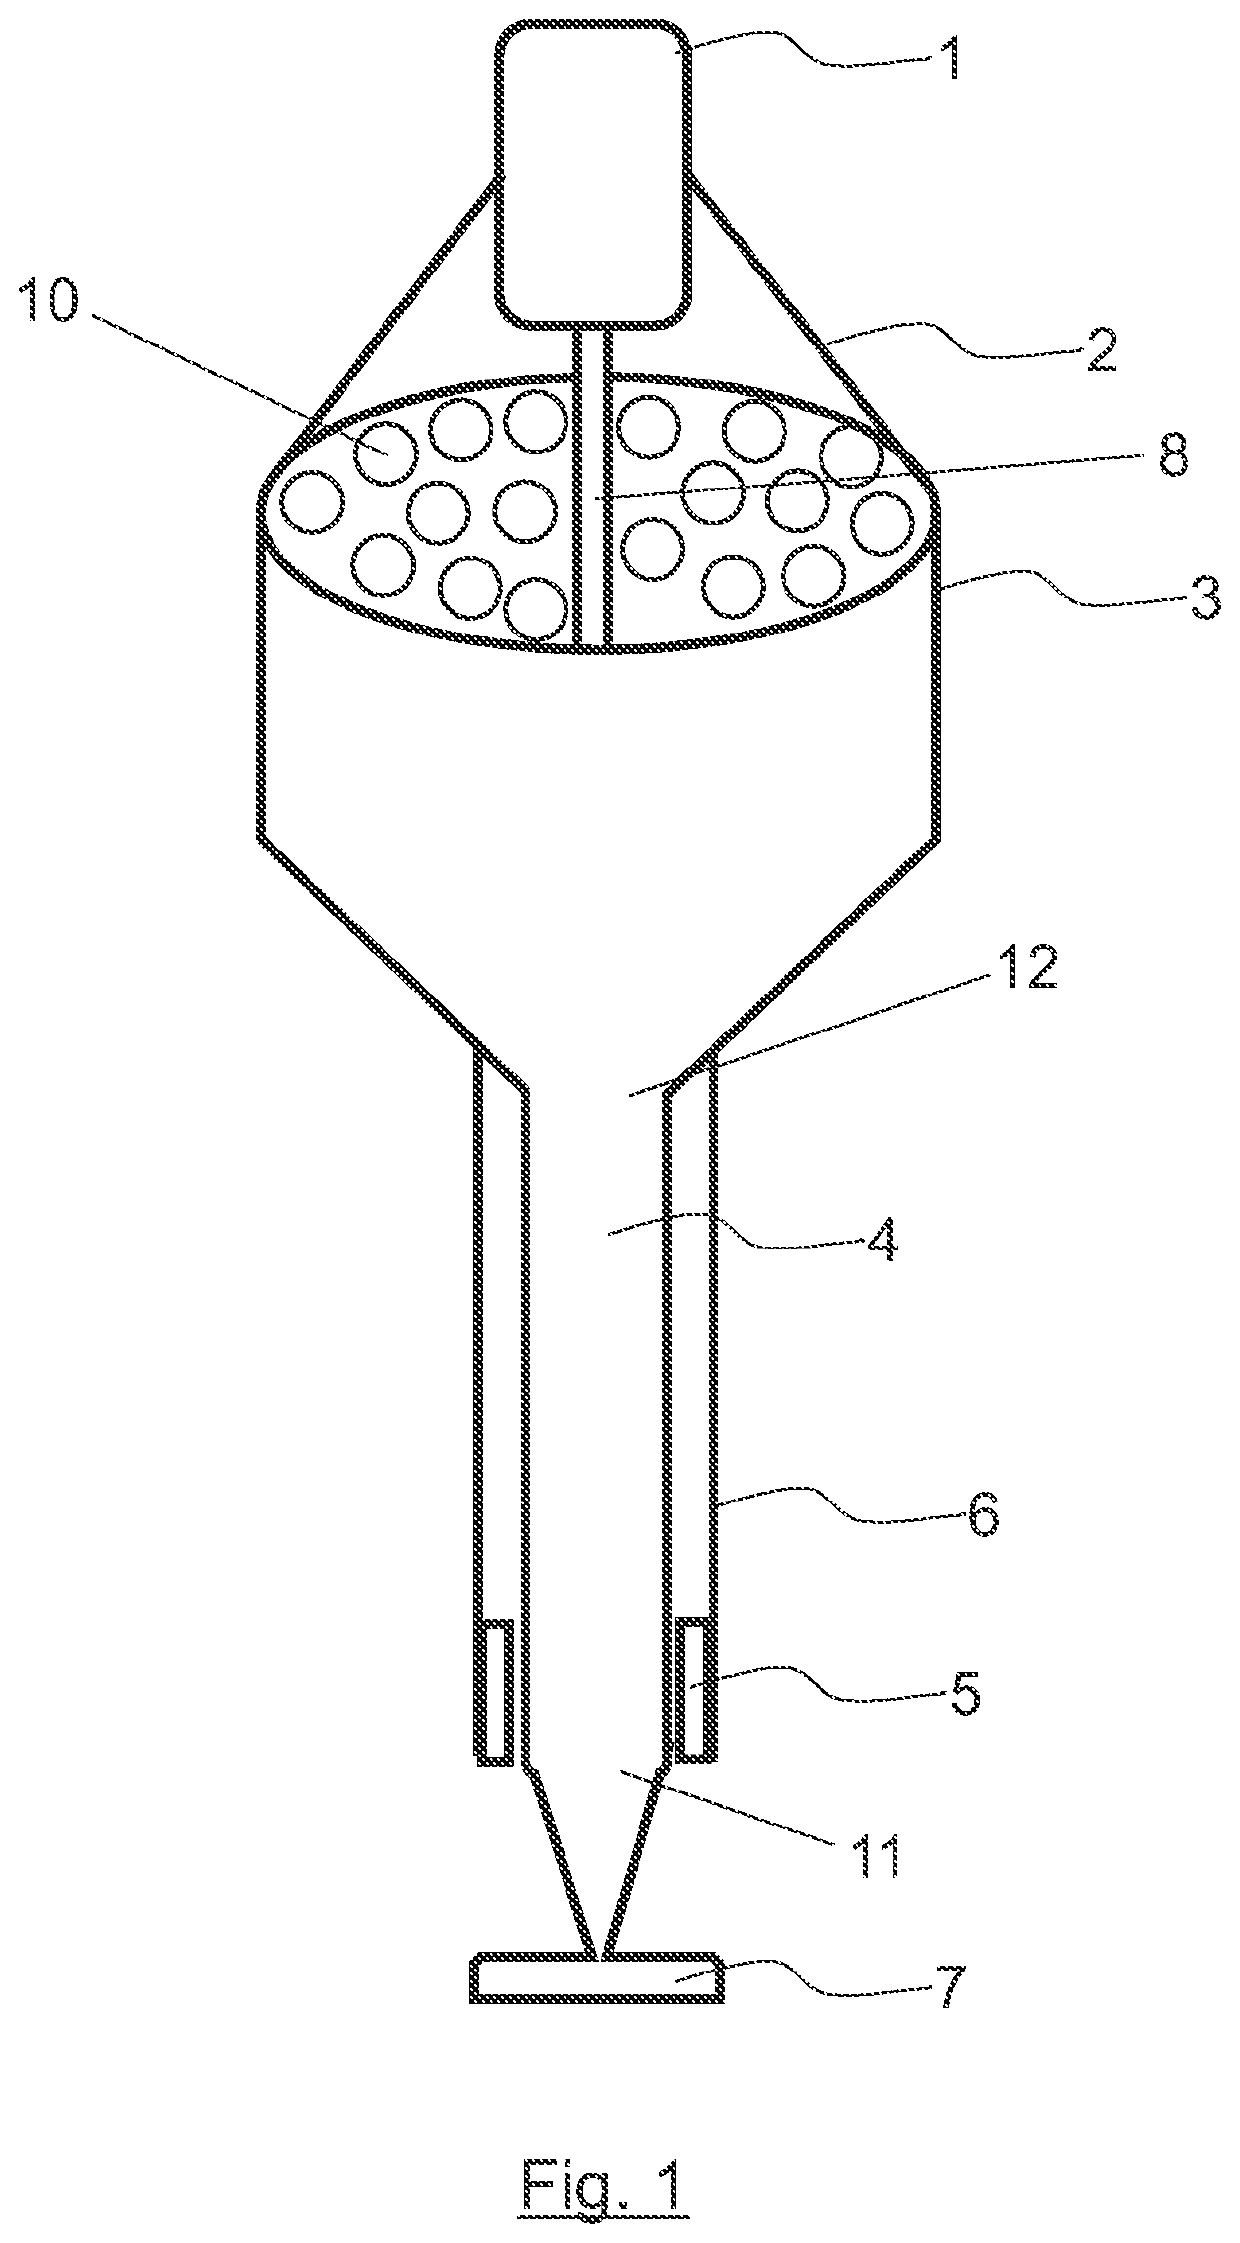 Injector device with plastic for repairing cracks